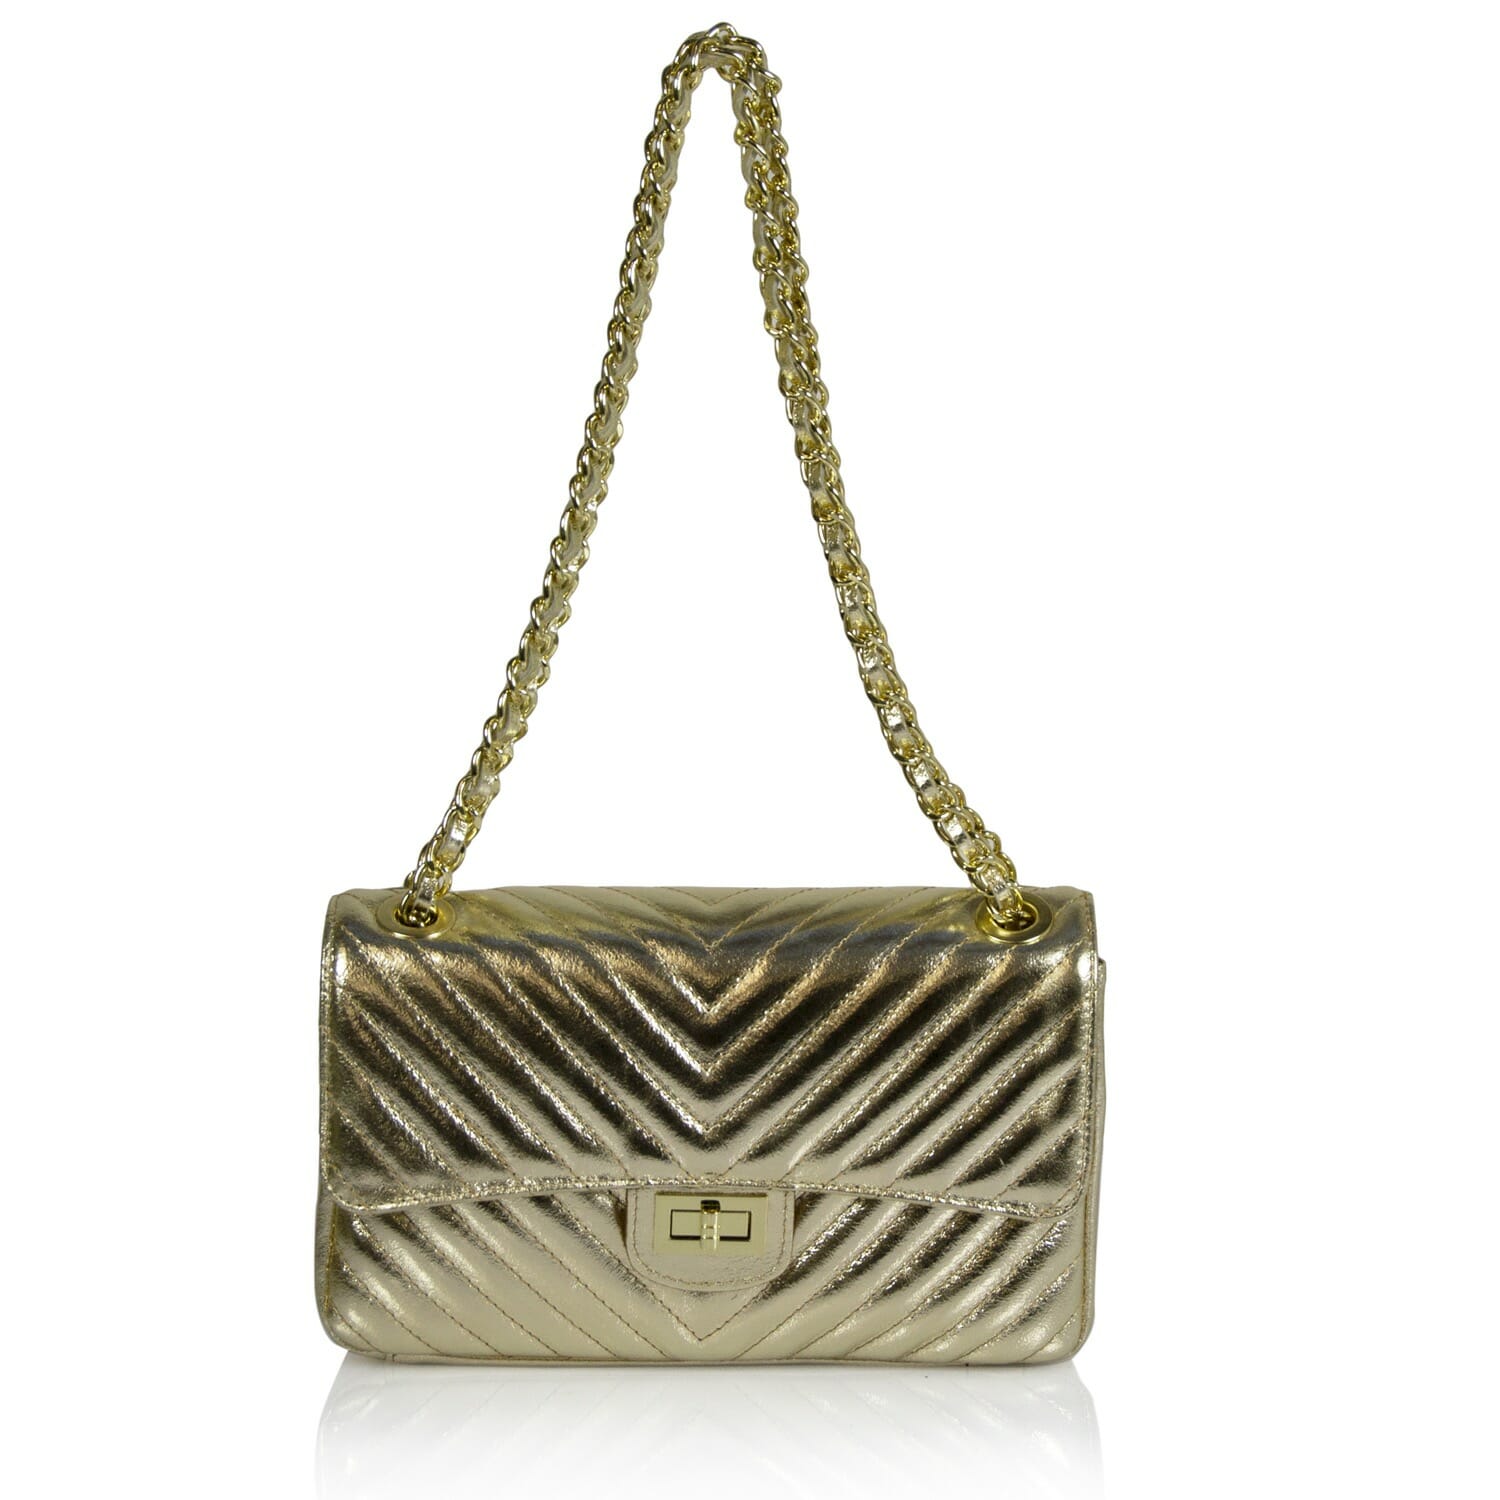 Americia Quilted Real Leather Shoulder Bag - GOLD METALLIC